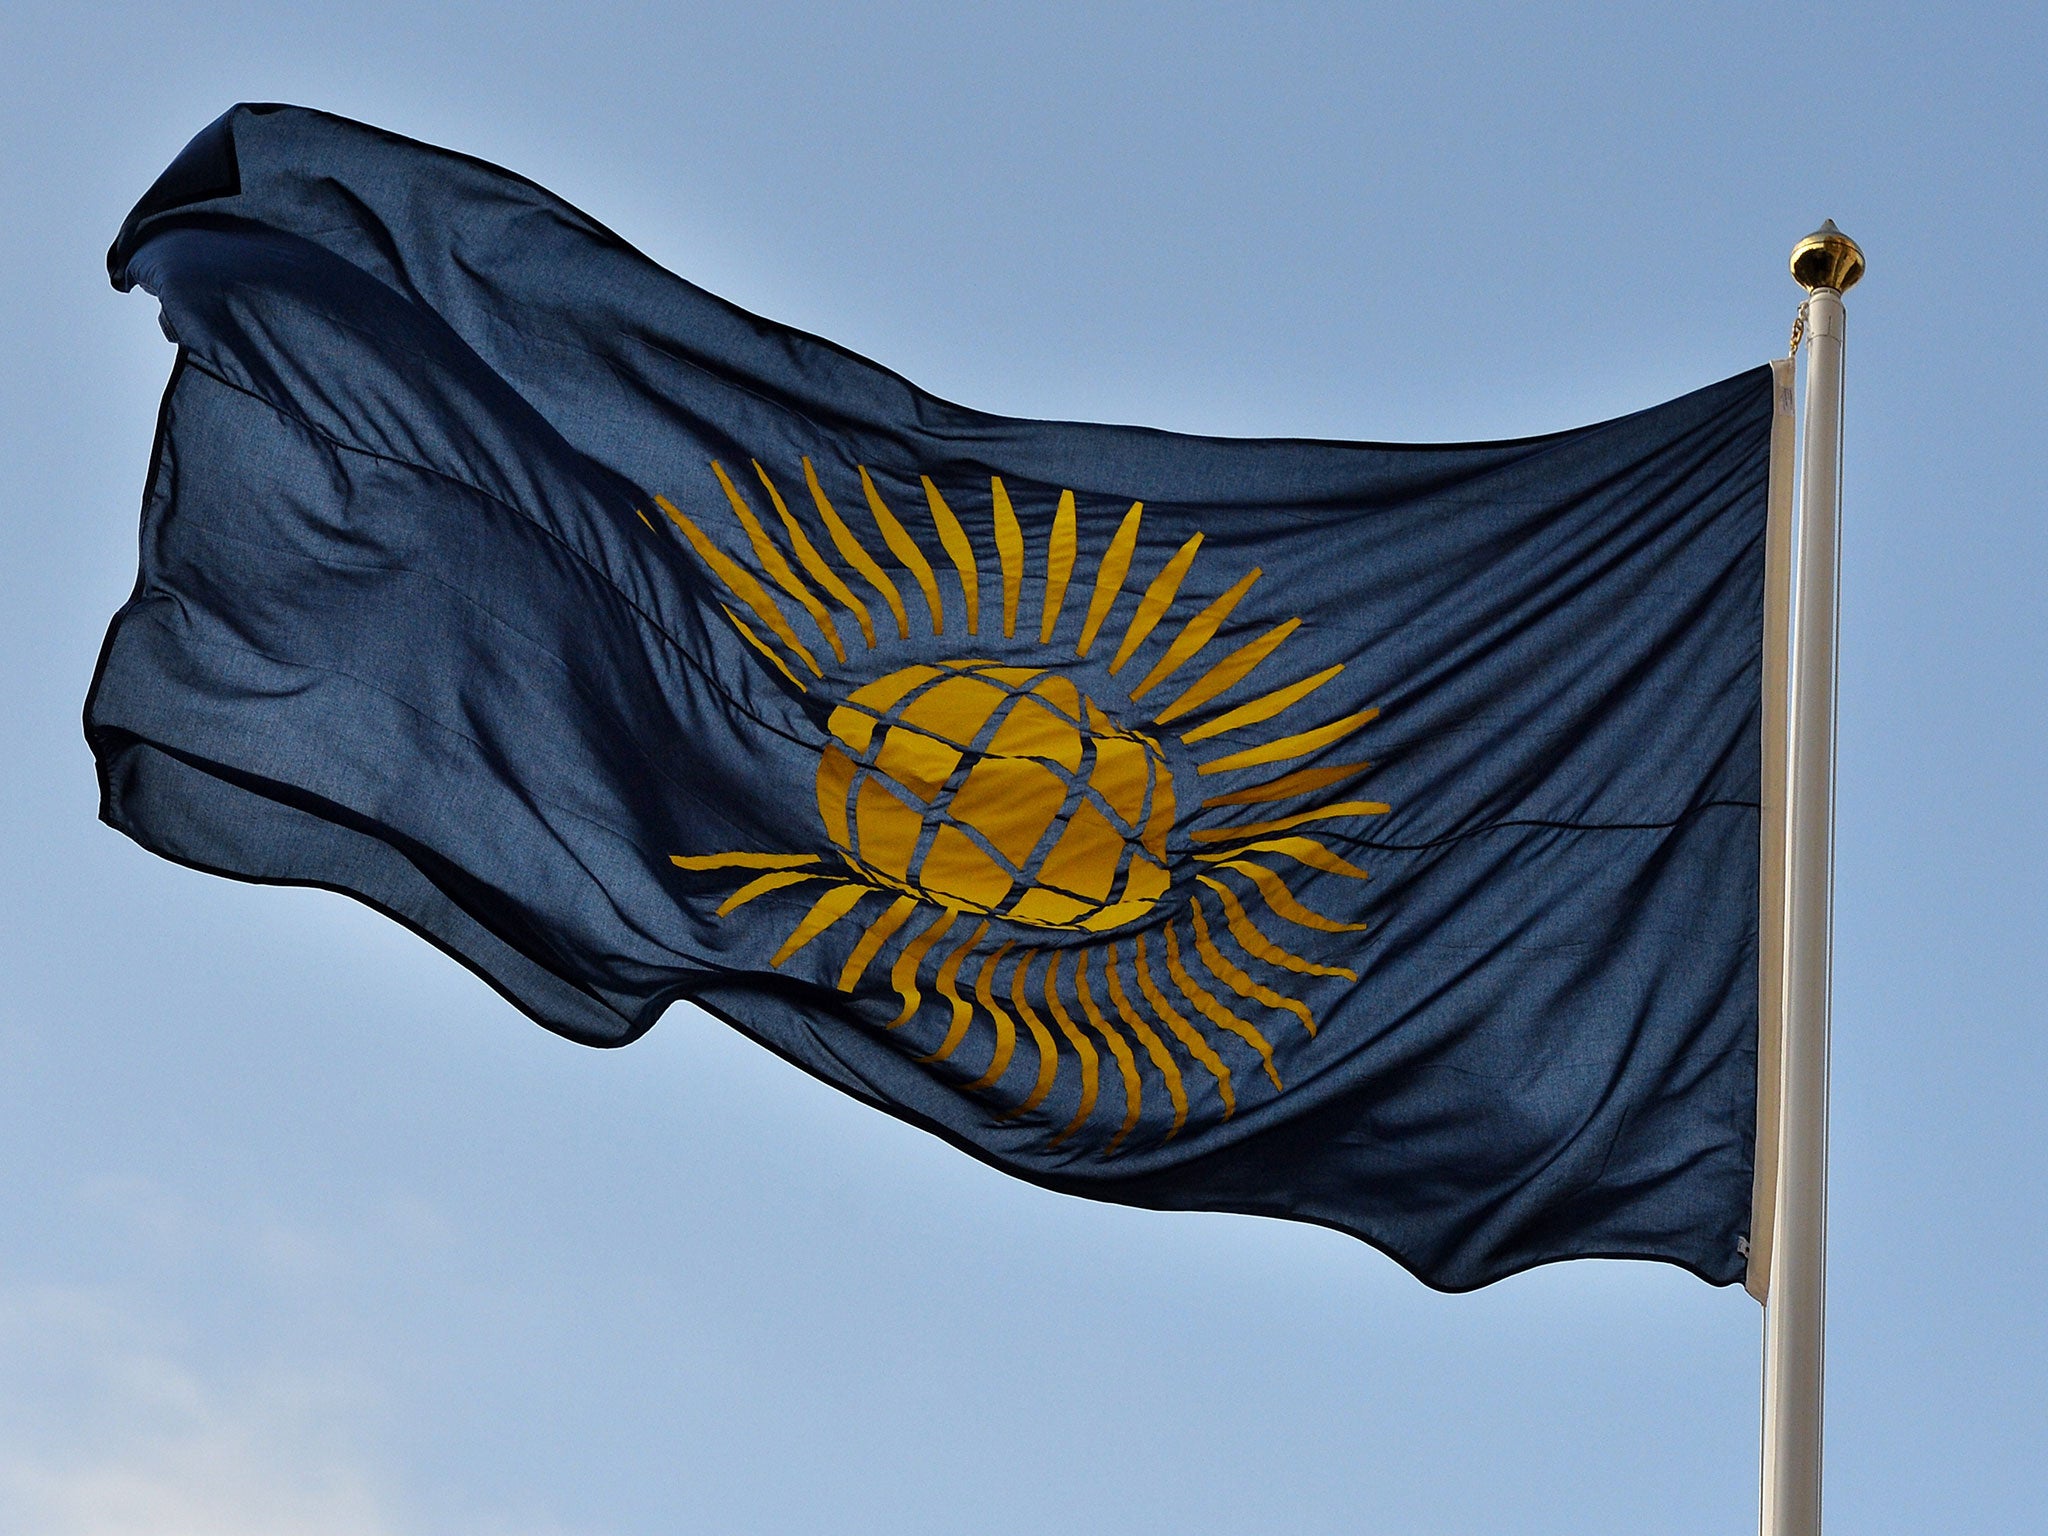 what is a british commonwealth